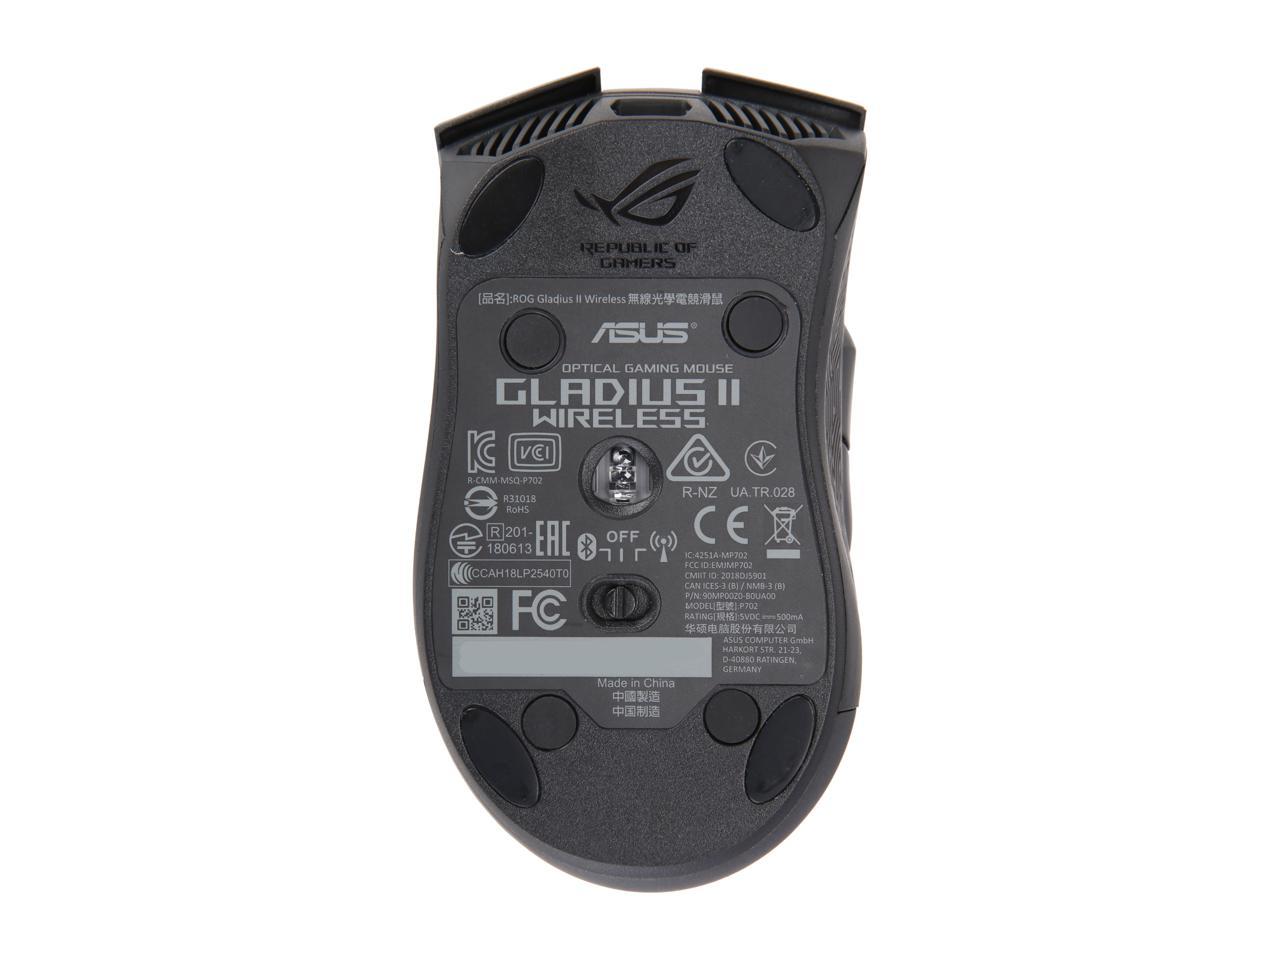 ASUS ROG Gladius II Wireless Optical Ergonomic FPS Gaming Mouse featuring 16000 dpi Optical, 50G Acceleration, 400 IPS sensor, swappable Omron switches, and ASUS Aura Sync RGB Lighting